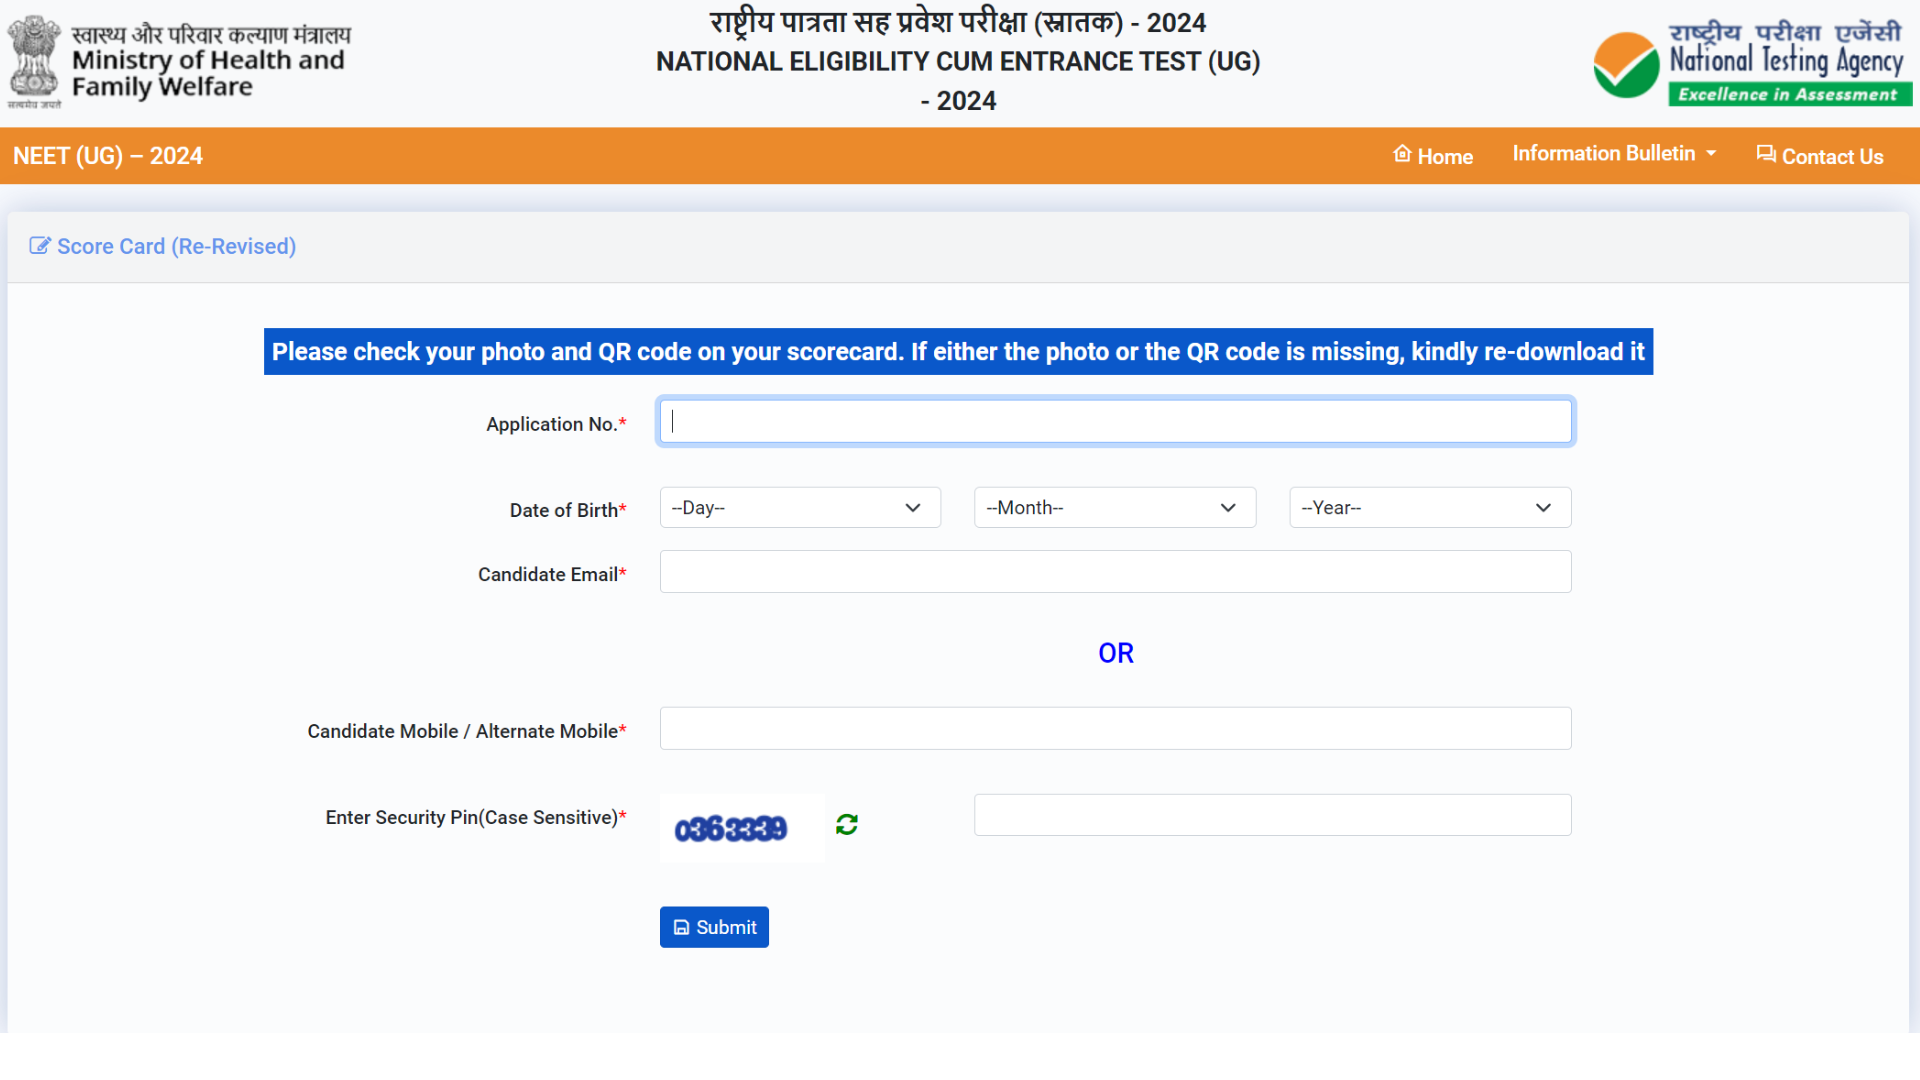 NTA NEET UG 2024 Admissions Test Revised Result with Score Card, Counseling